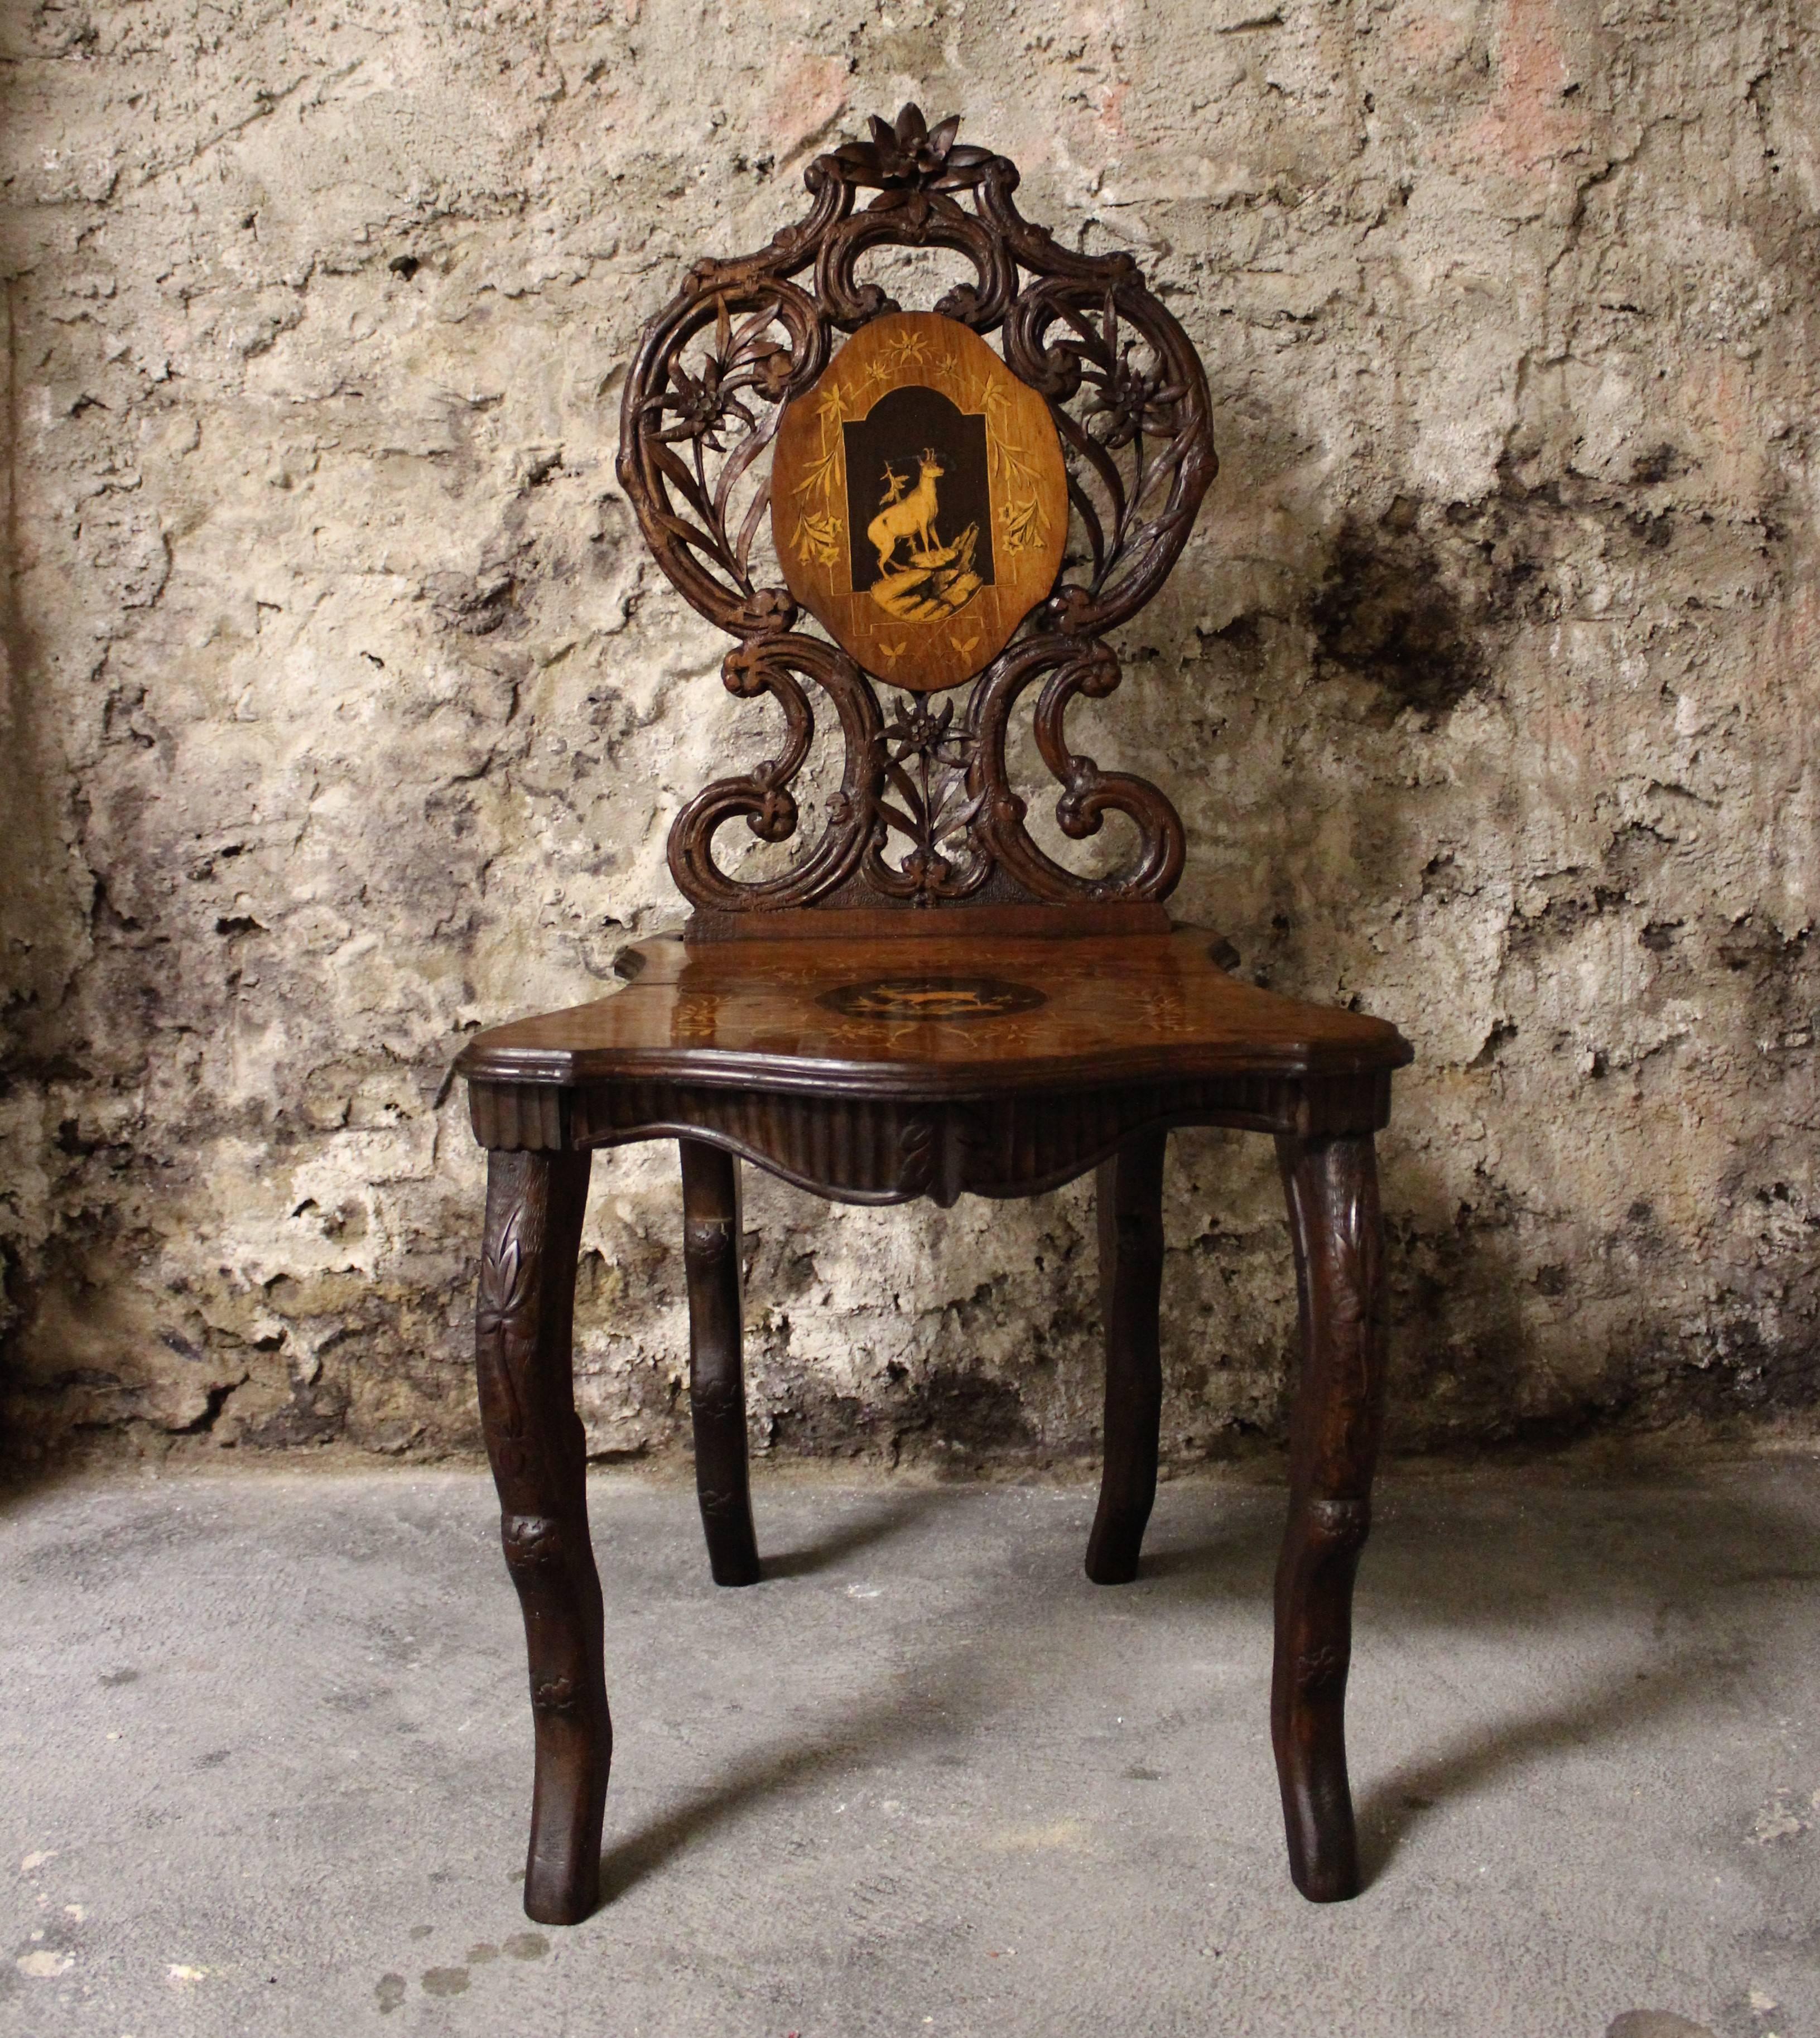 19th century Black Forest carved chair with inlay.